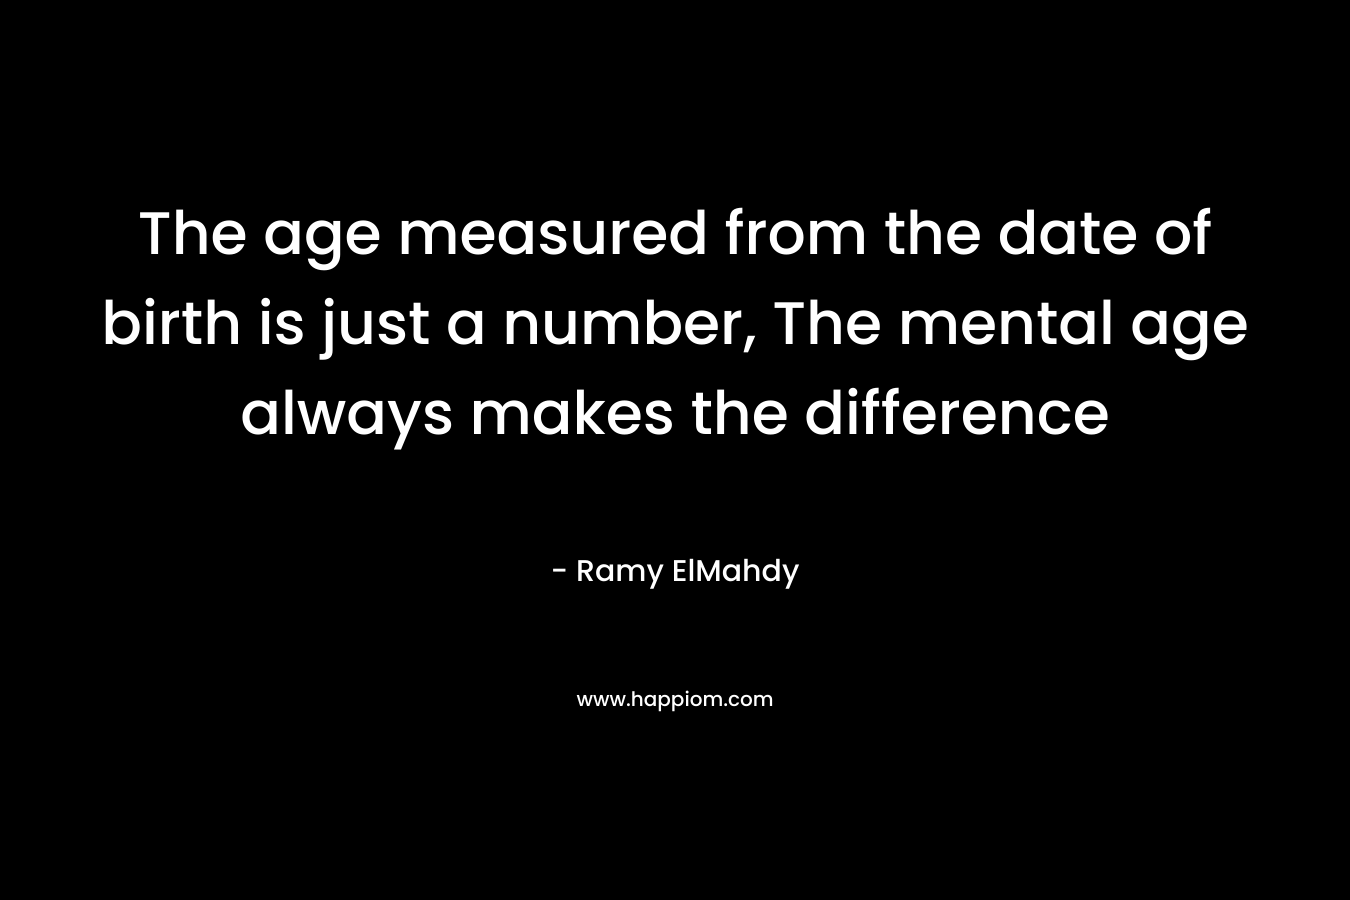 The age measured from the date of birth is just a number, The mental age always makes the difference